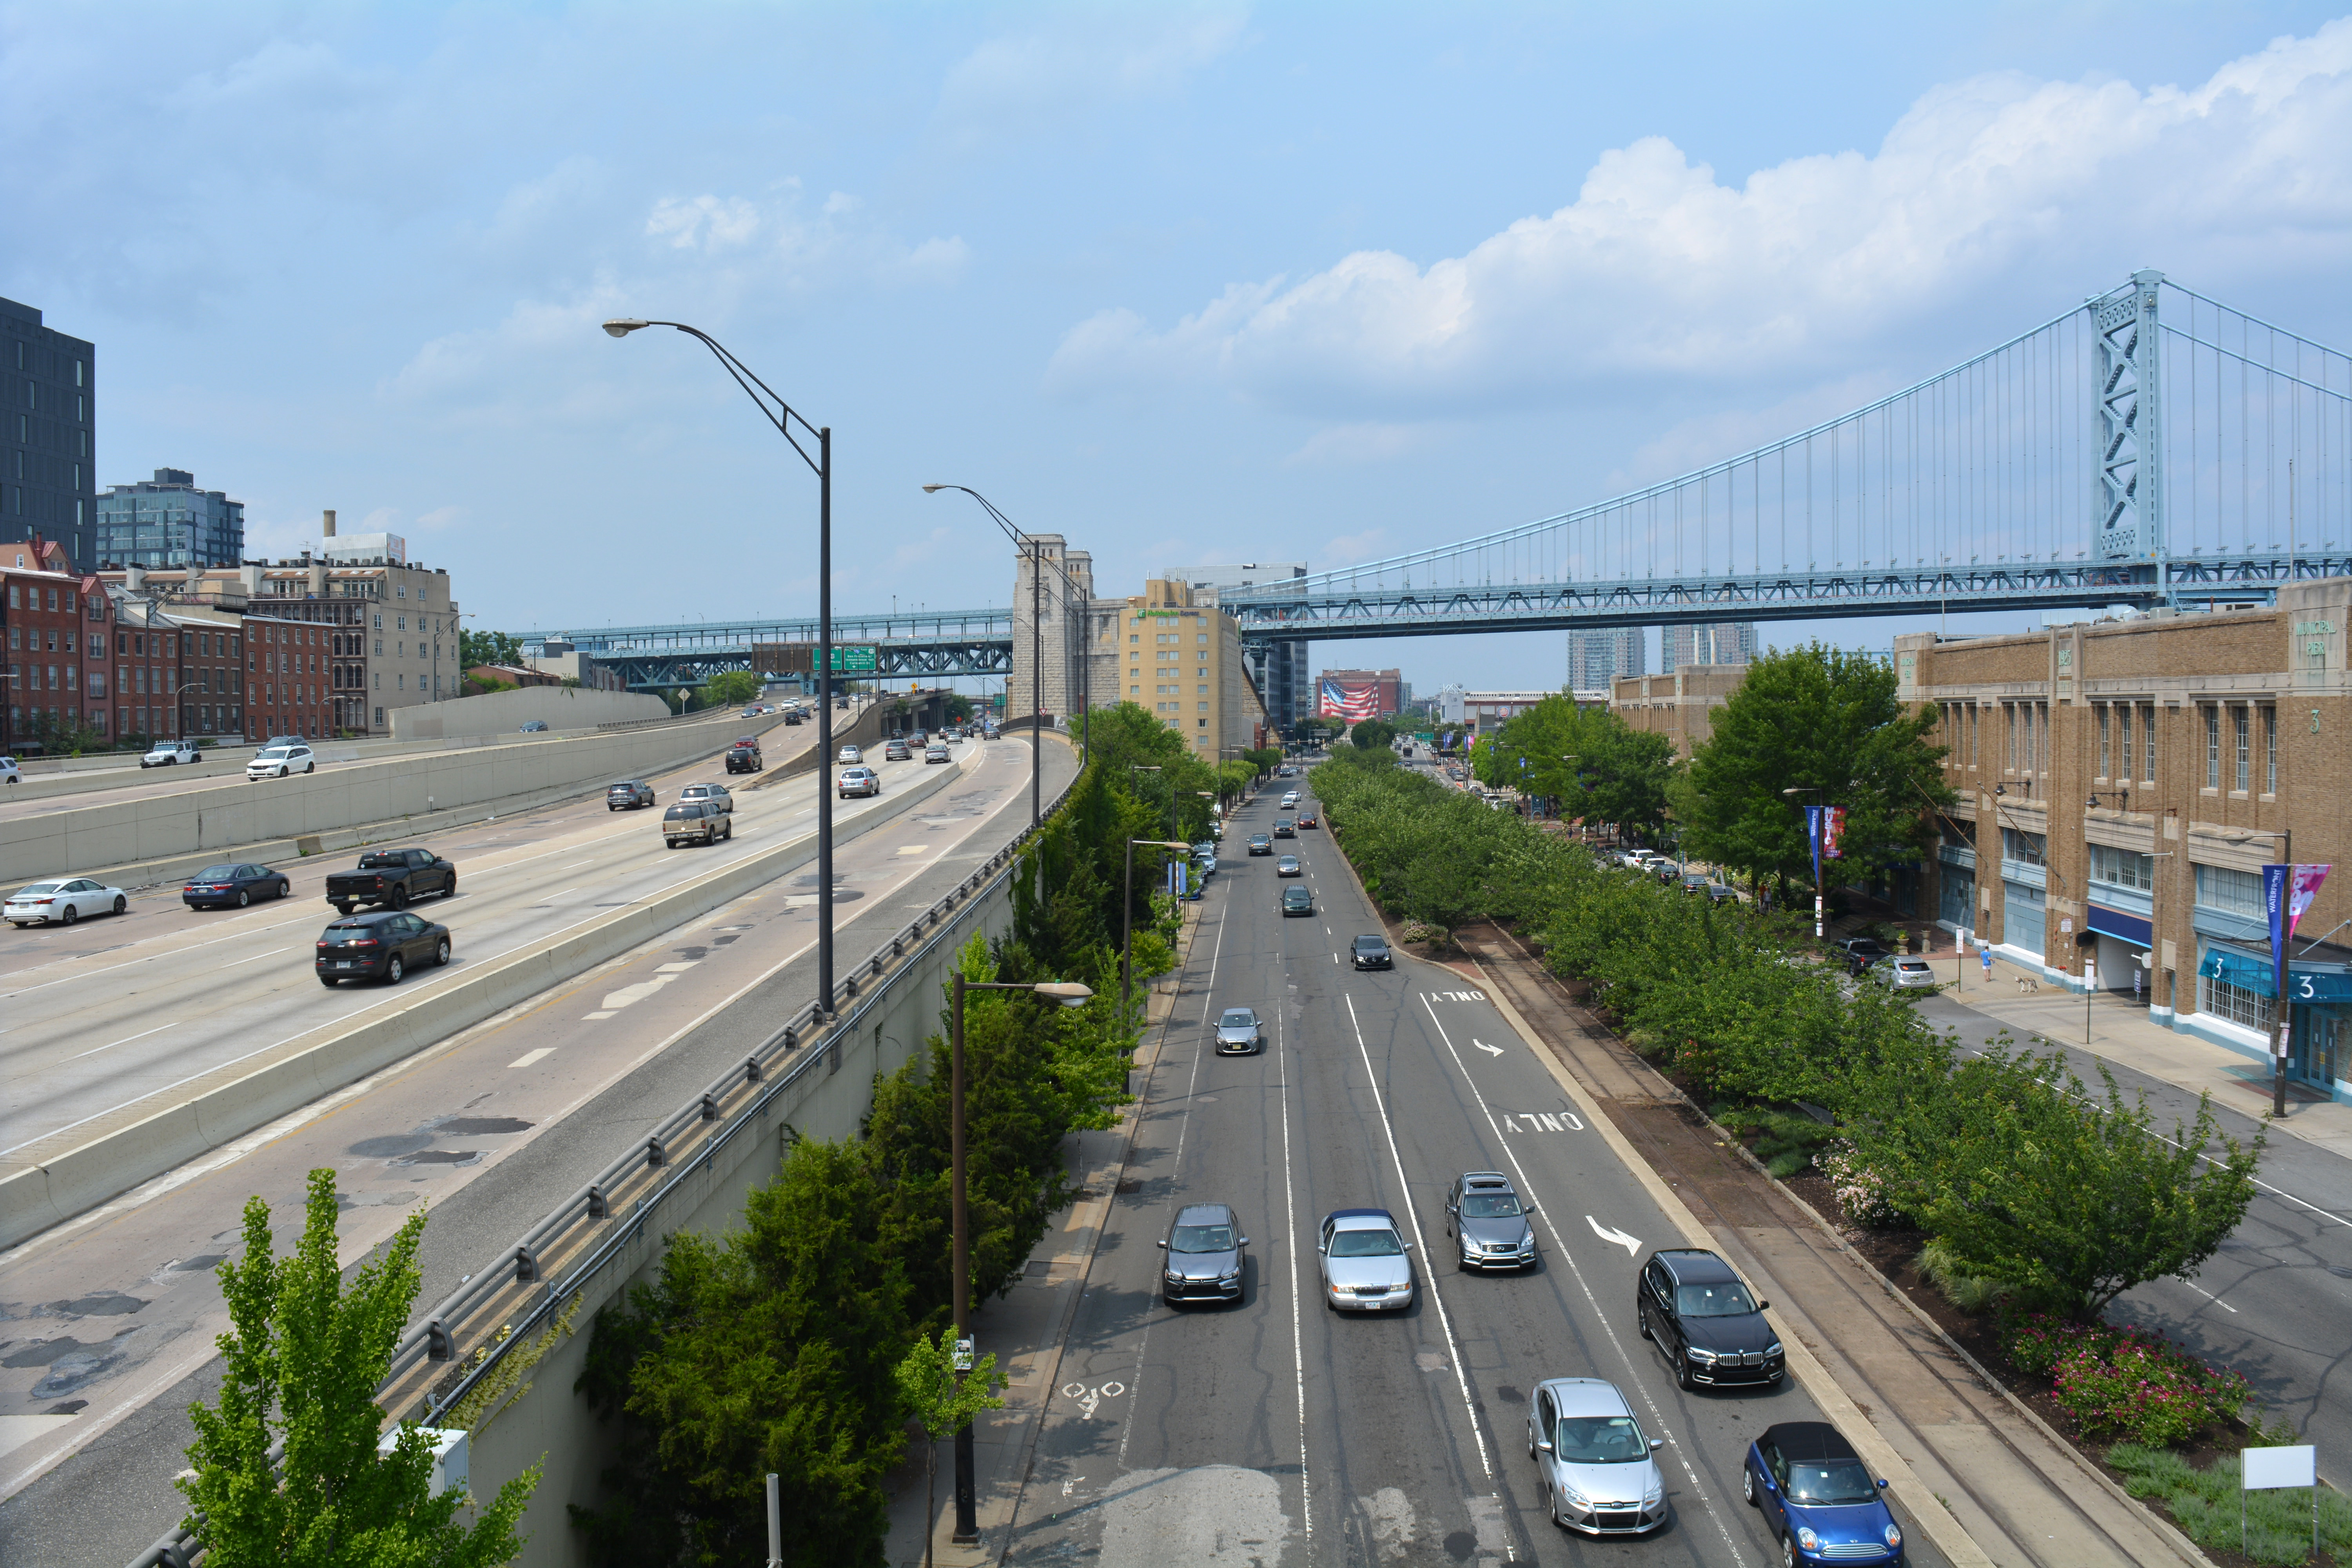 The view of I95 Northbound and the Ben Franklin Bridge from Market Street